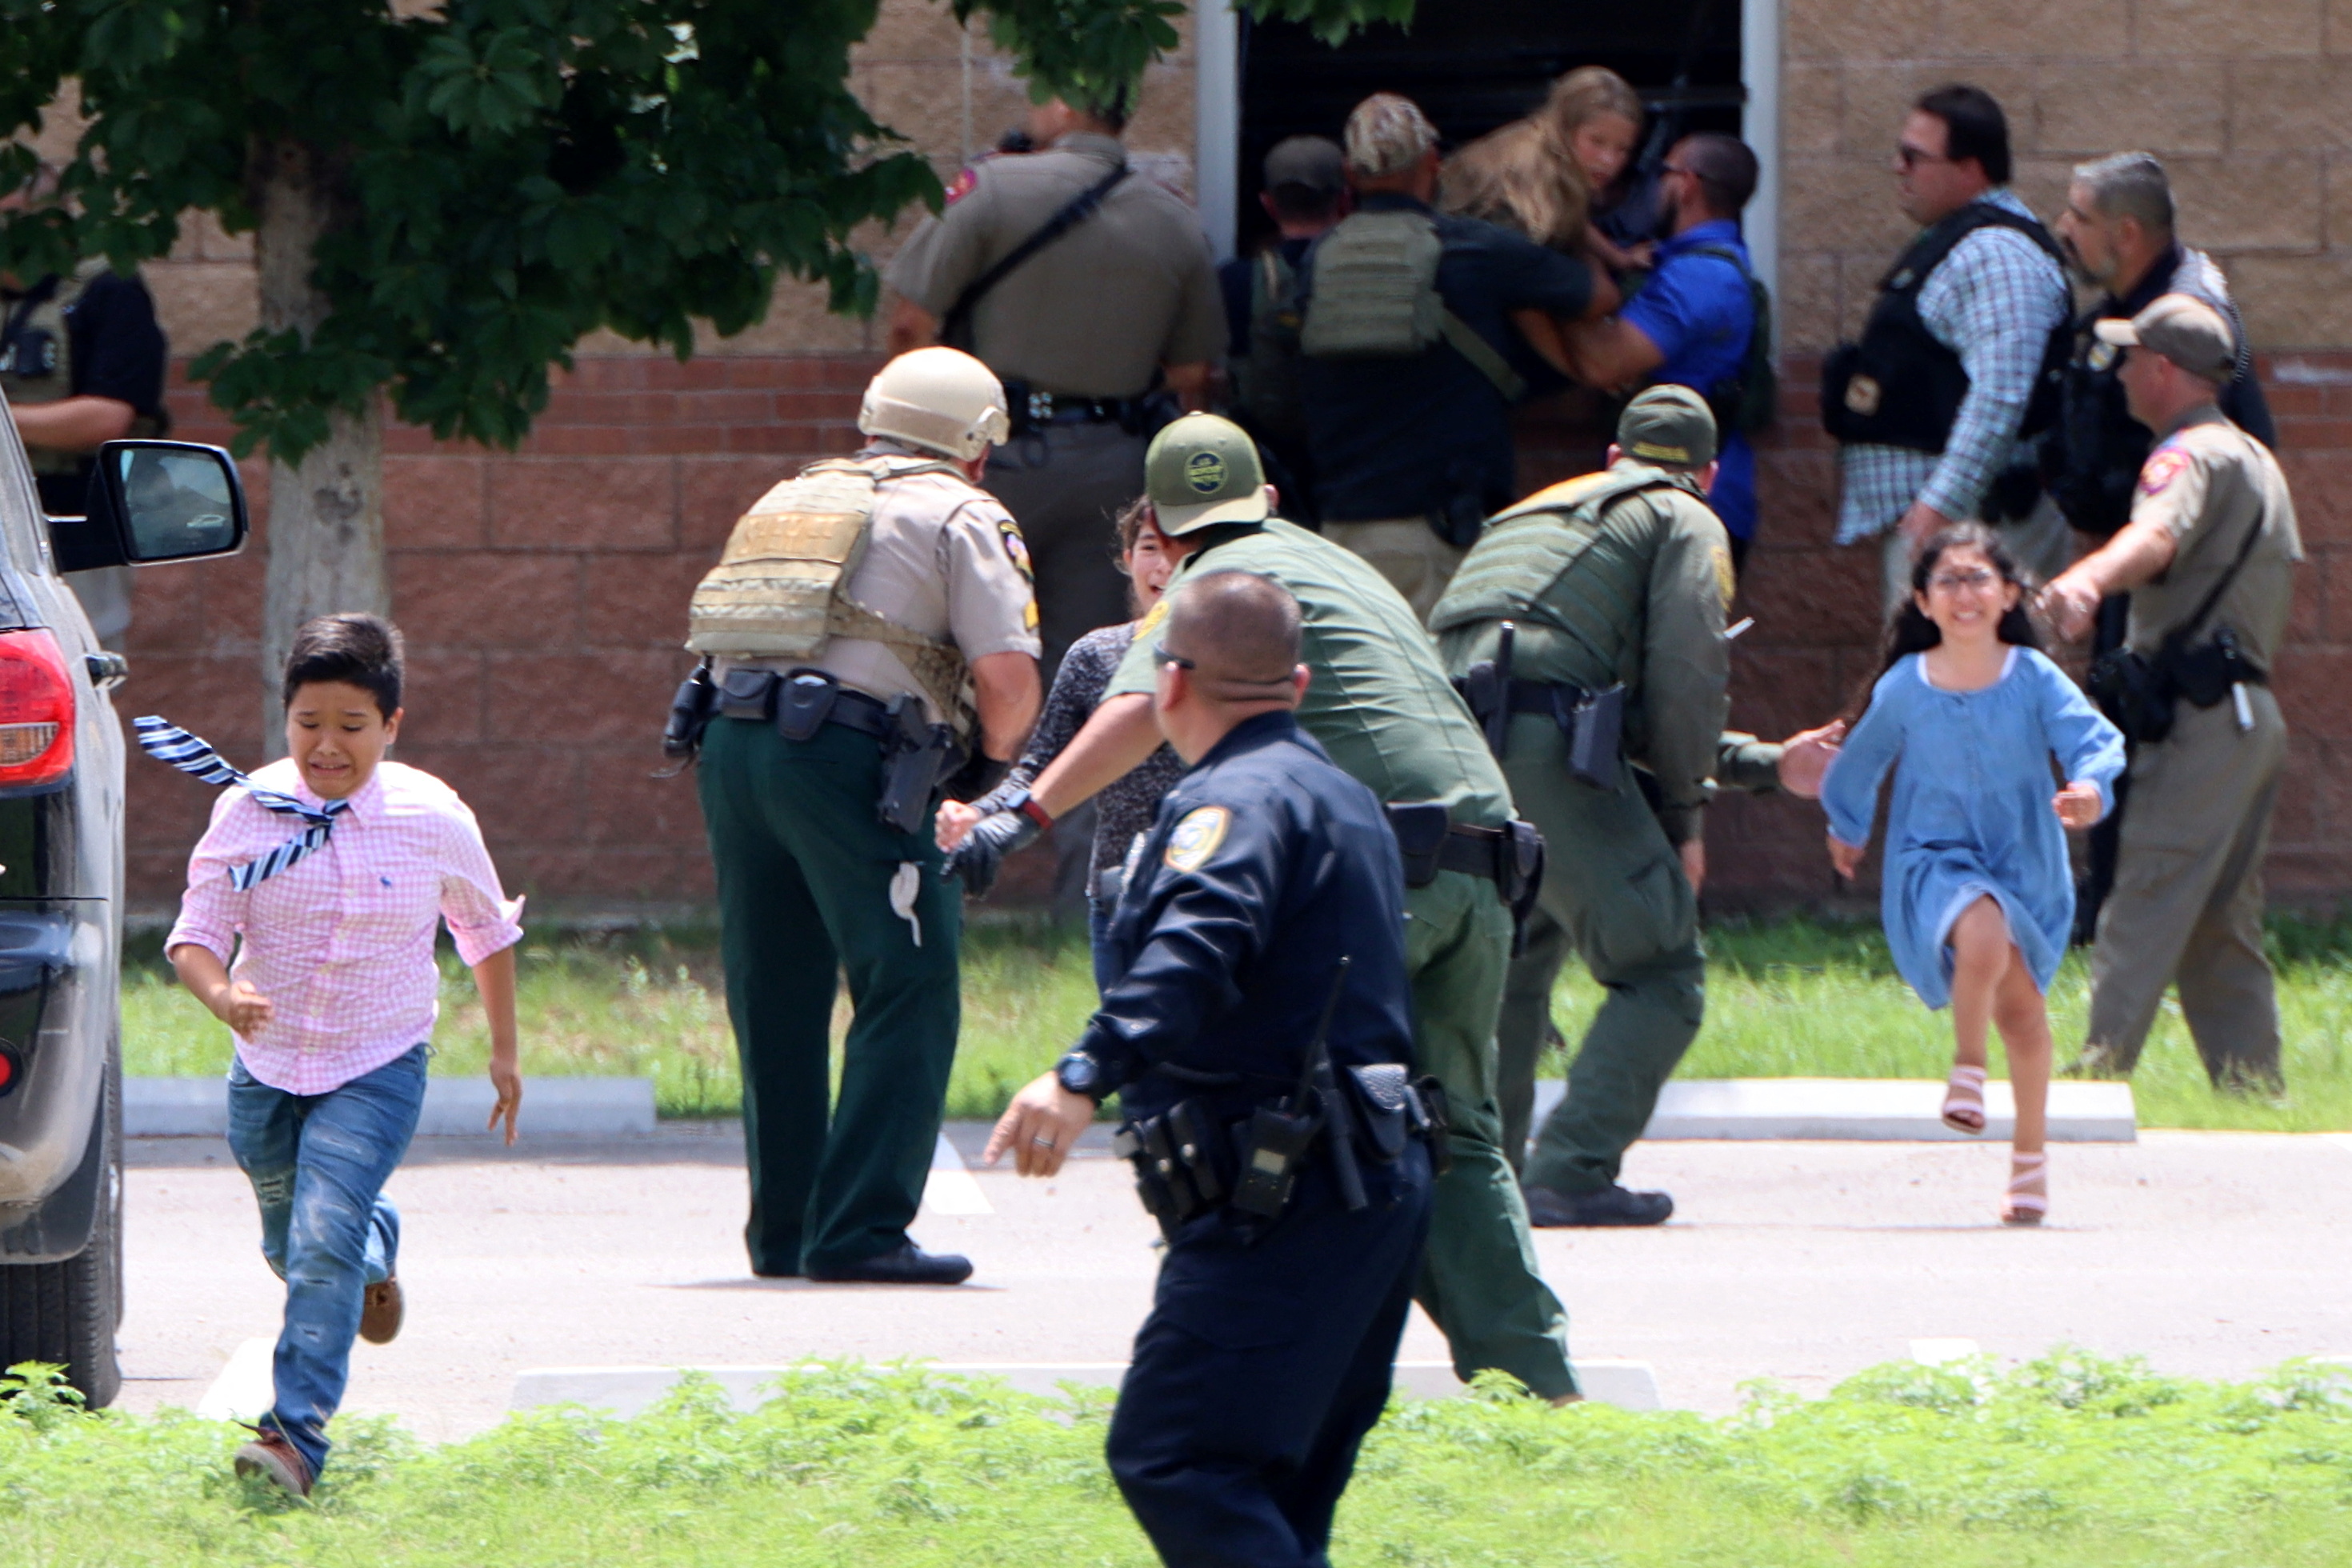 Children run to safety after escaping from a window during a mass shooting at Robb Elementary School where a gunman killed nineteen children and two adults in Uvalde, Texas, U.S. May 24, 2022. Picture taken May 24, 2022.  Pete Luna/Uvalde Leader-News/Handout via REUTERS  NO RESALES. NO ARCHIVES. MANDATORY CREDIT